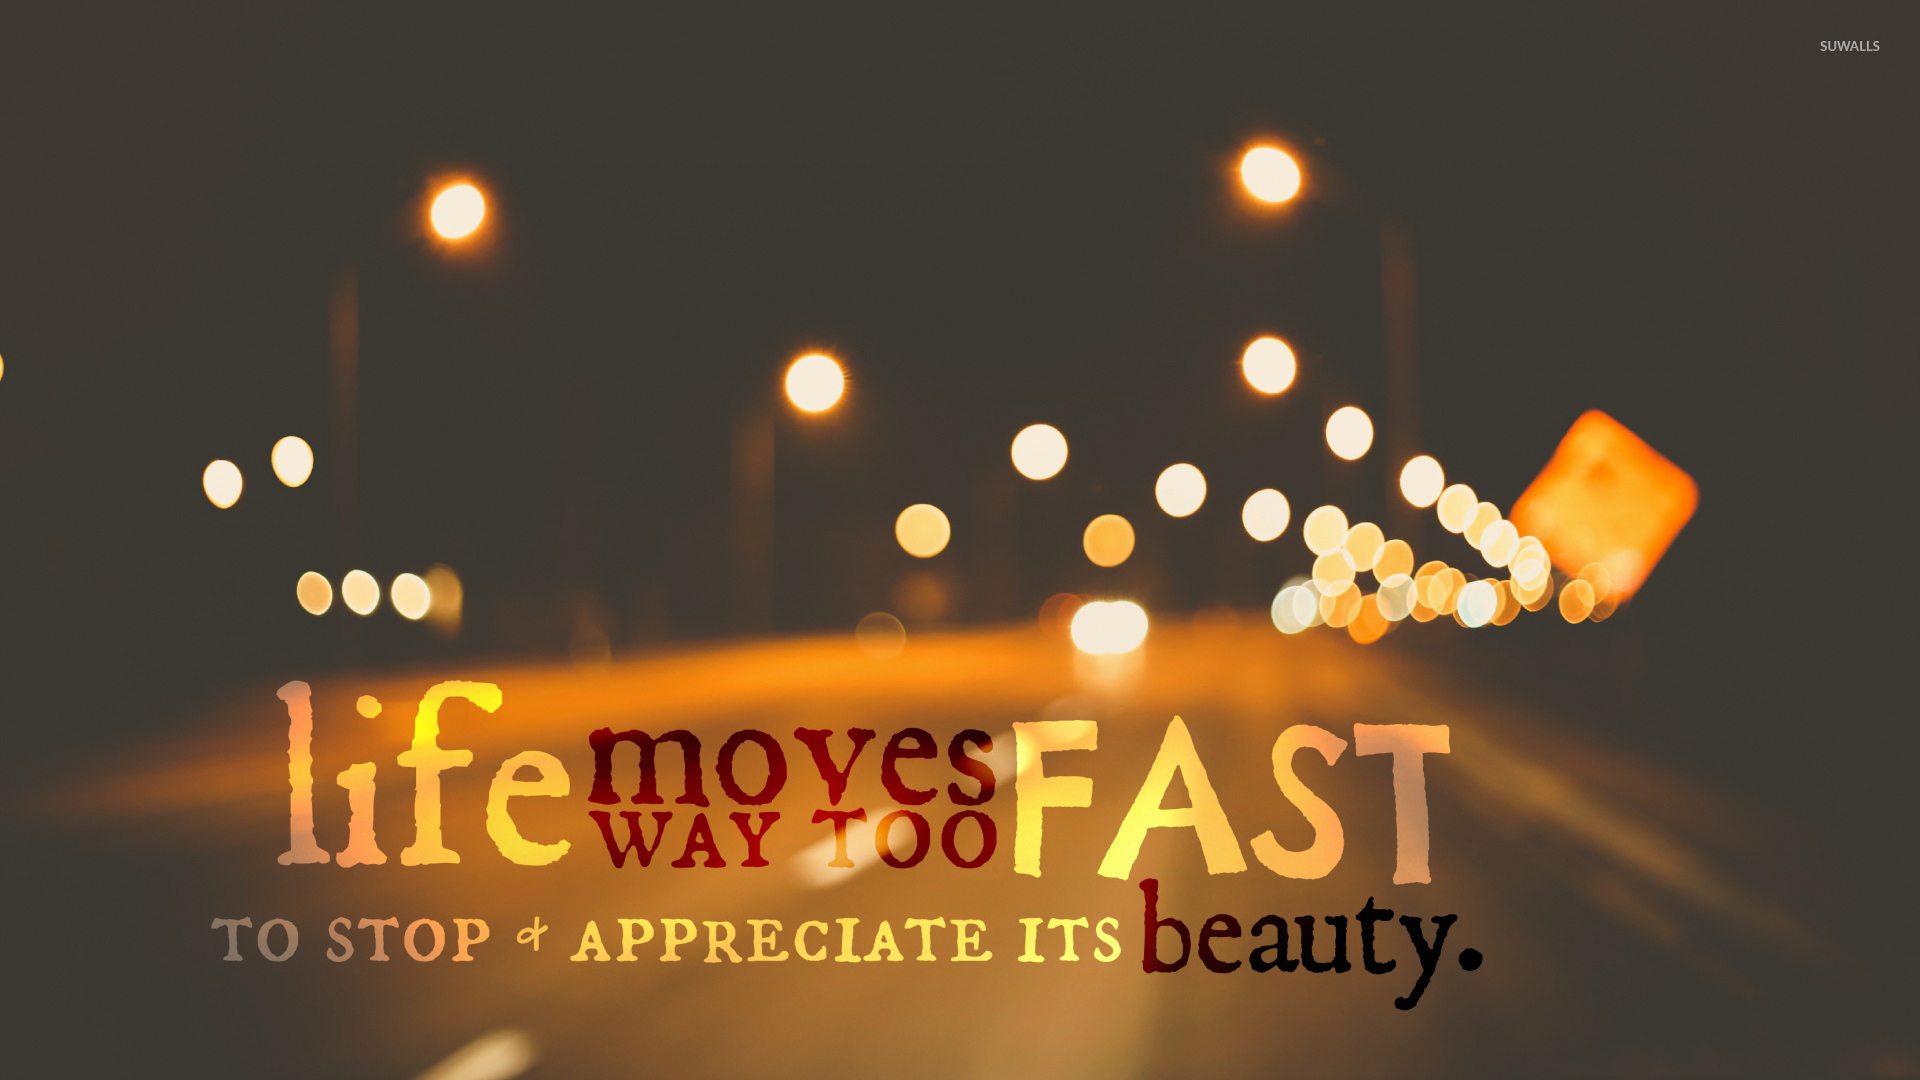 Life moves too fast to stop and appreciate its beauty wallpaper